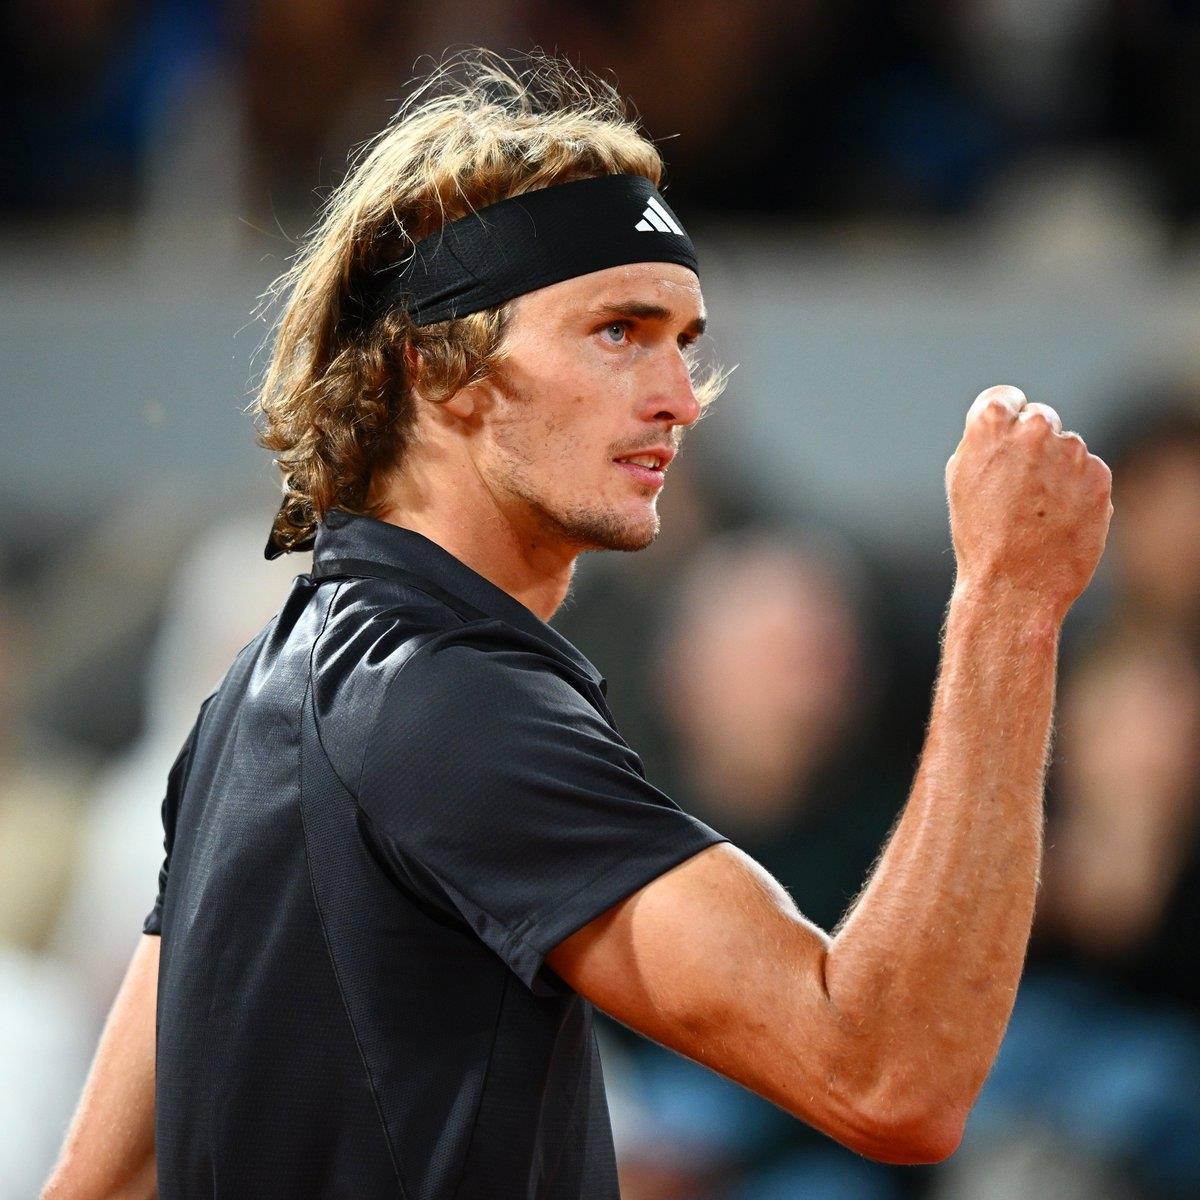  French Open: Zverev Edges Tiafoe In Late-Night Thriller, Moves To Fourth Round 